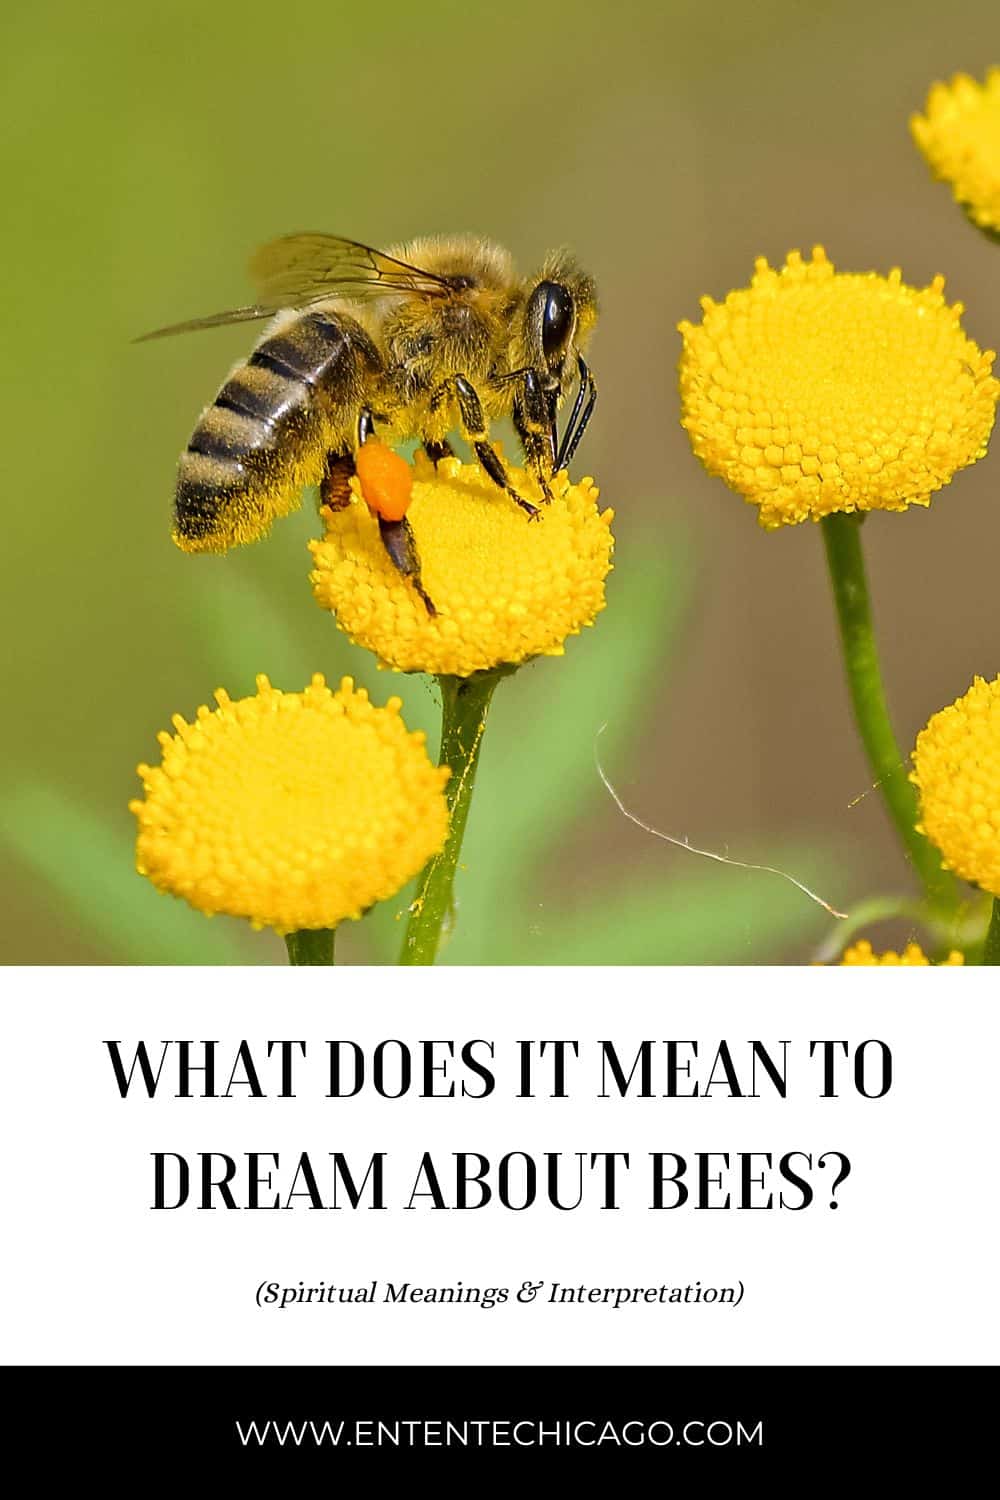 What Is the Spiritual Meaning of Bees in Our Dreams